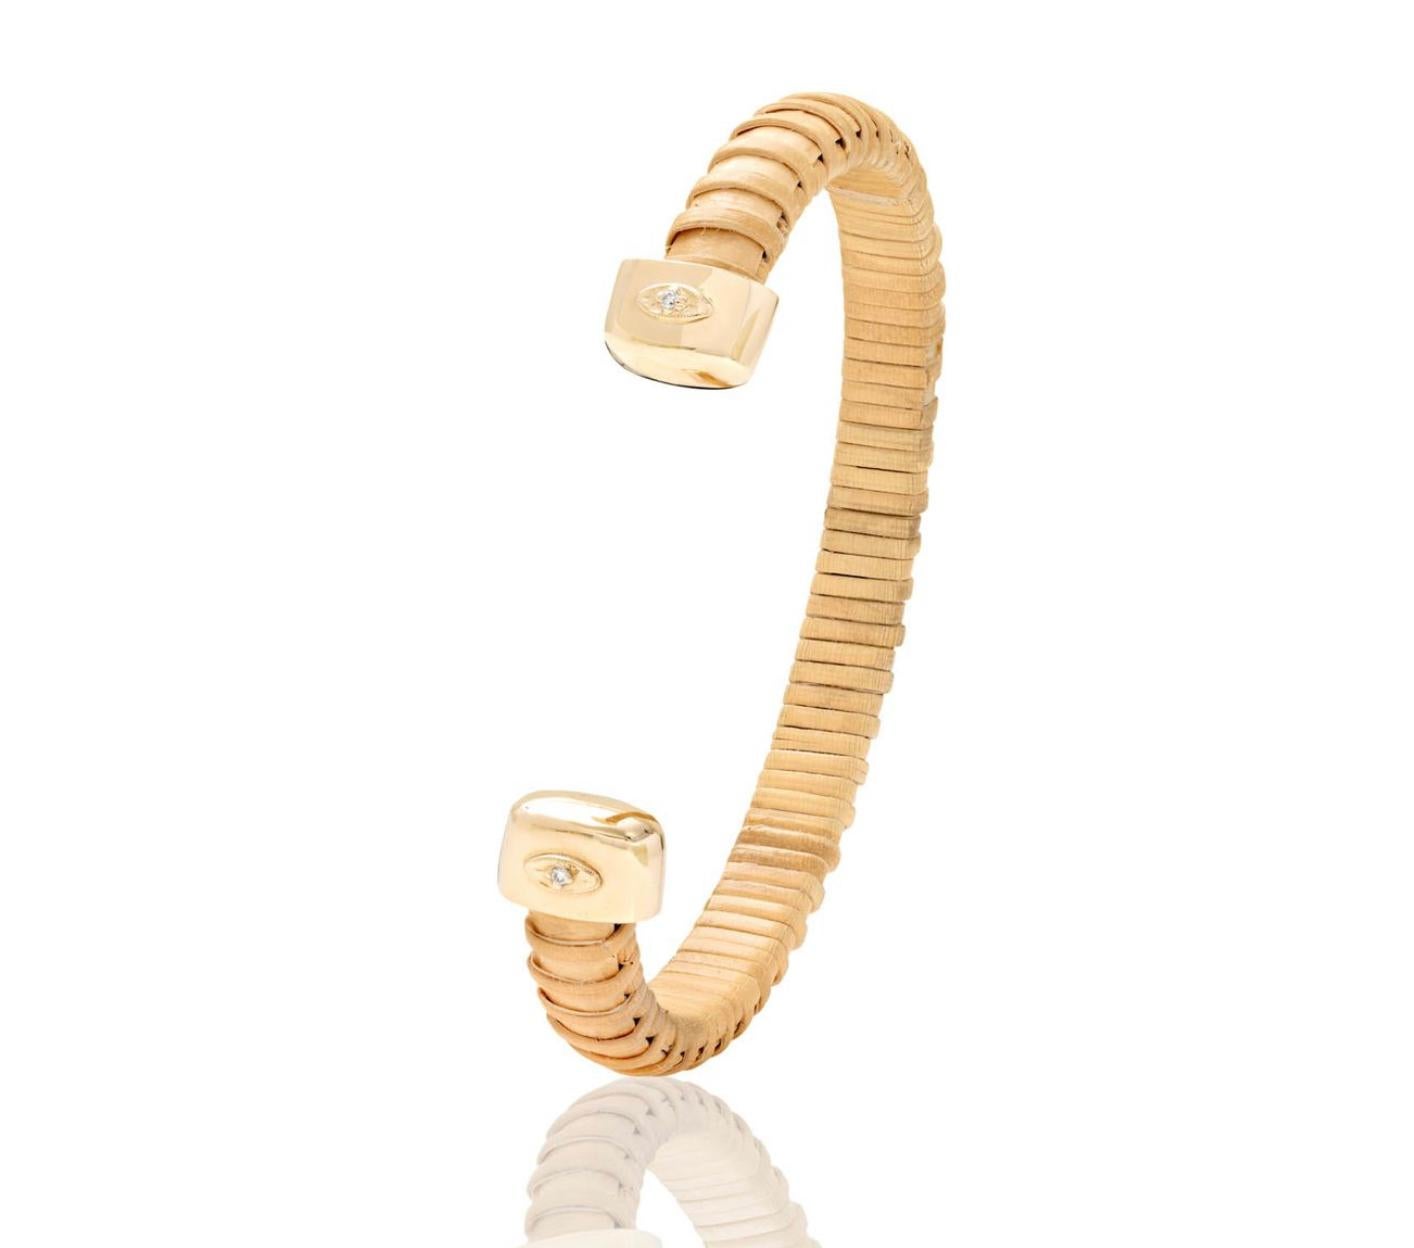 Nantucket Basket Lightship jewelry is a tradition in New England. This handmade cuff celebrates the tradition with a modern esthetic by adding gold and diamonds. Thin natural cain & rattan cuff with 10K yellow gold caps and 14K yellow gold evil eyes